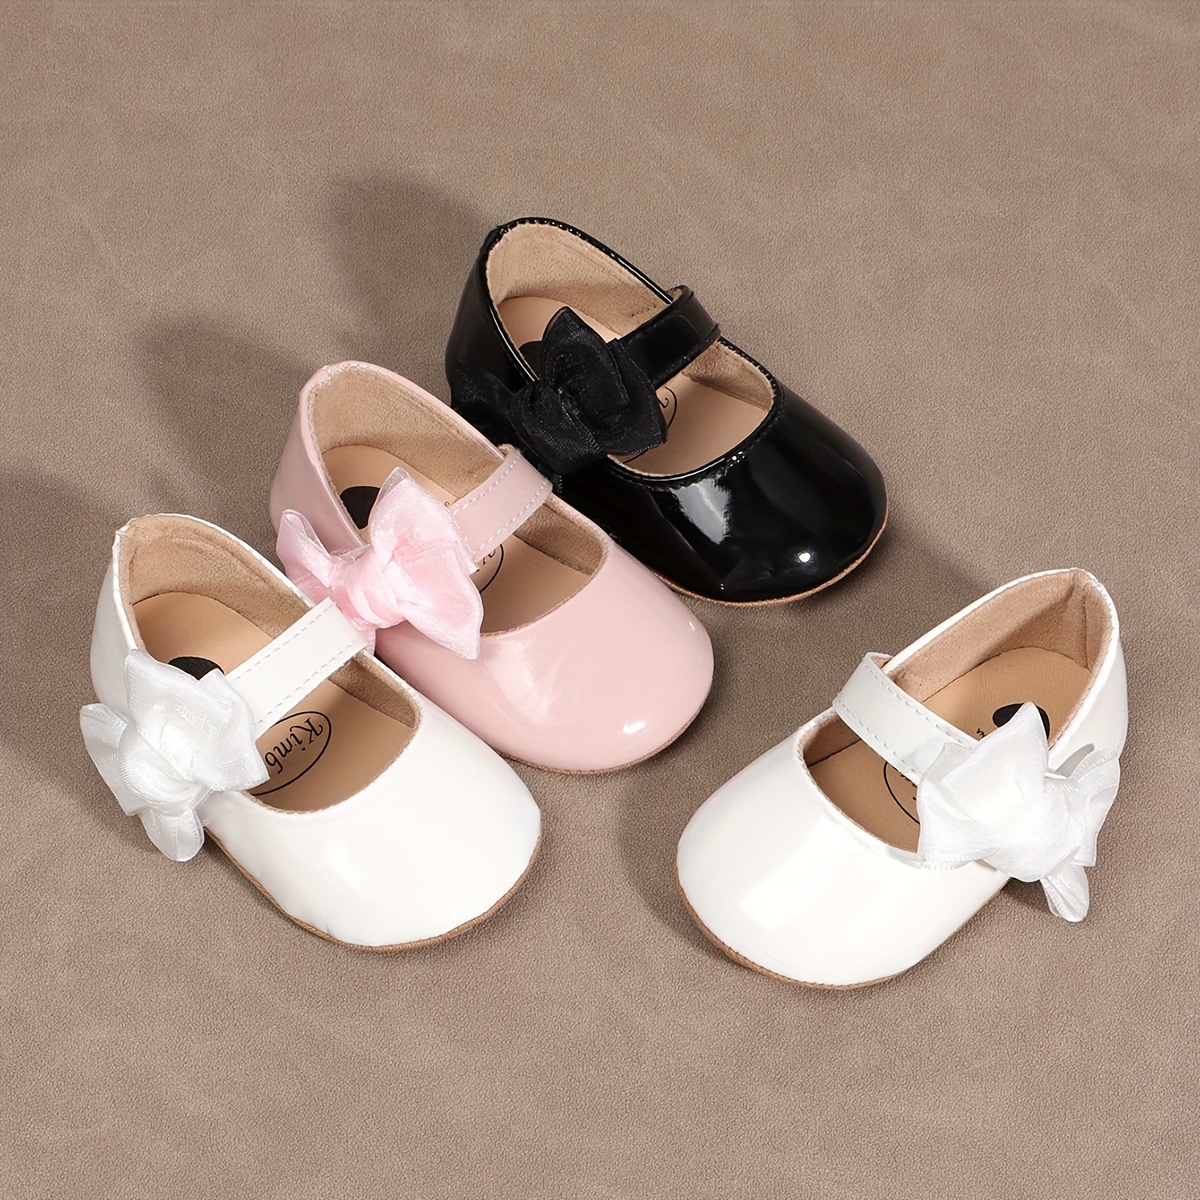 

Lively & Cheerful Trendy Cute Bowknot Solid Color Shoes For Baby Girls, Lightweight Non-slip Walking Shoes For Spring And Autumn